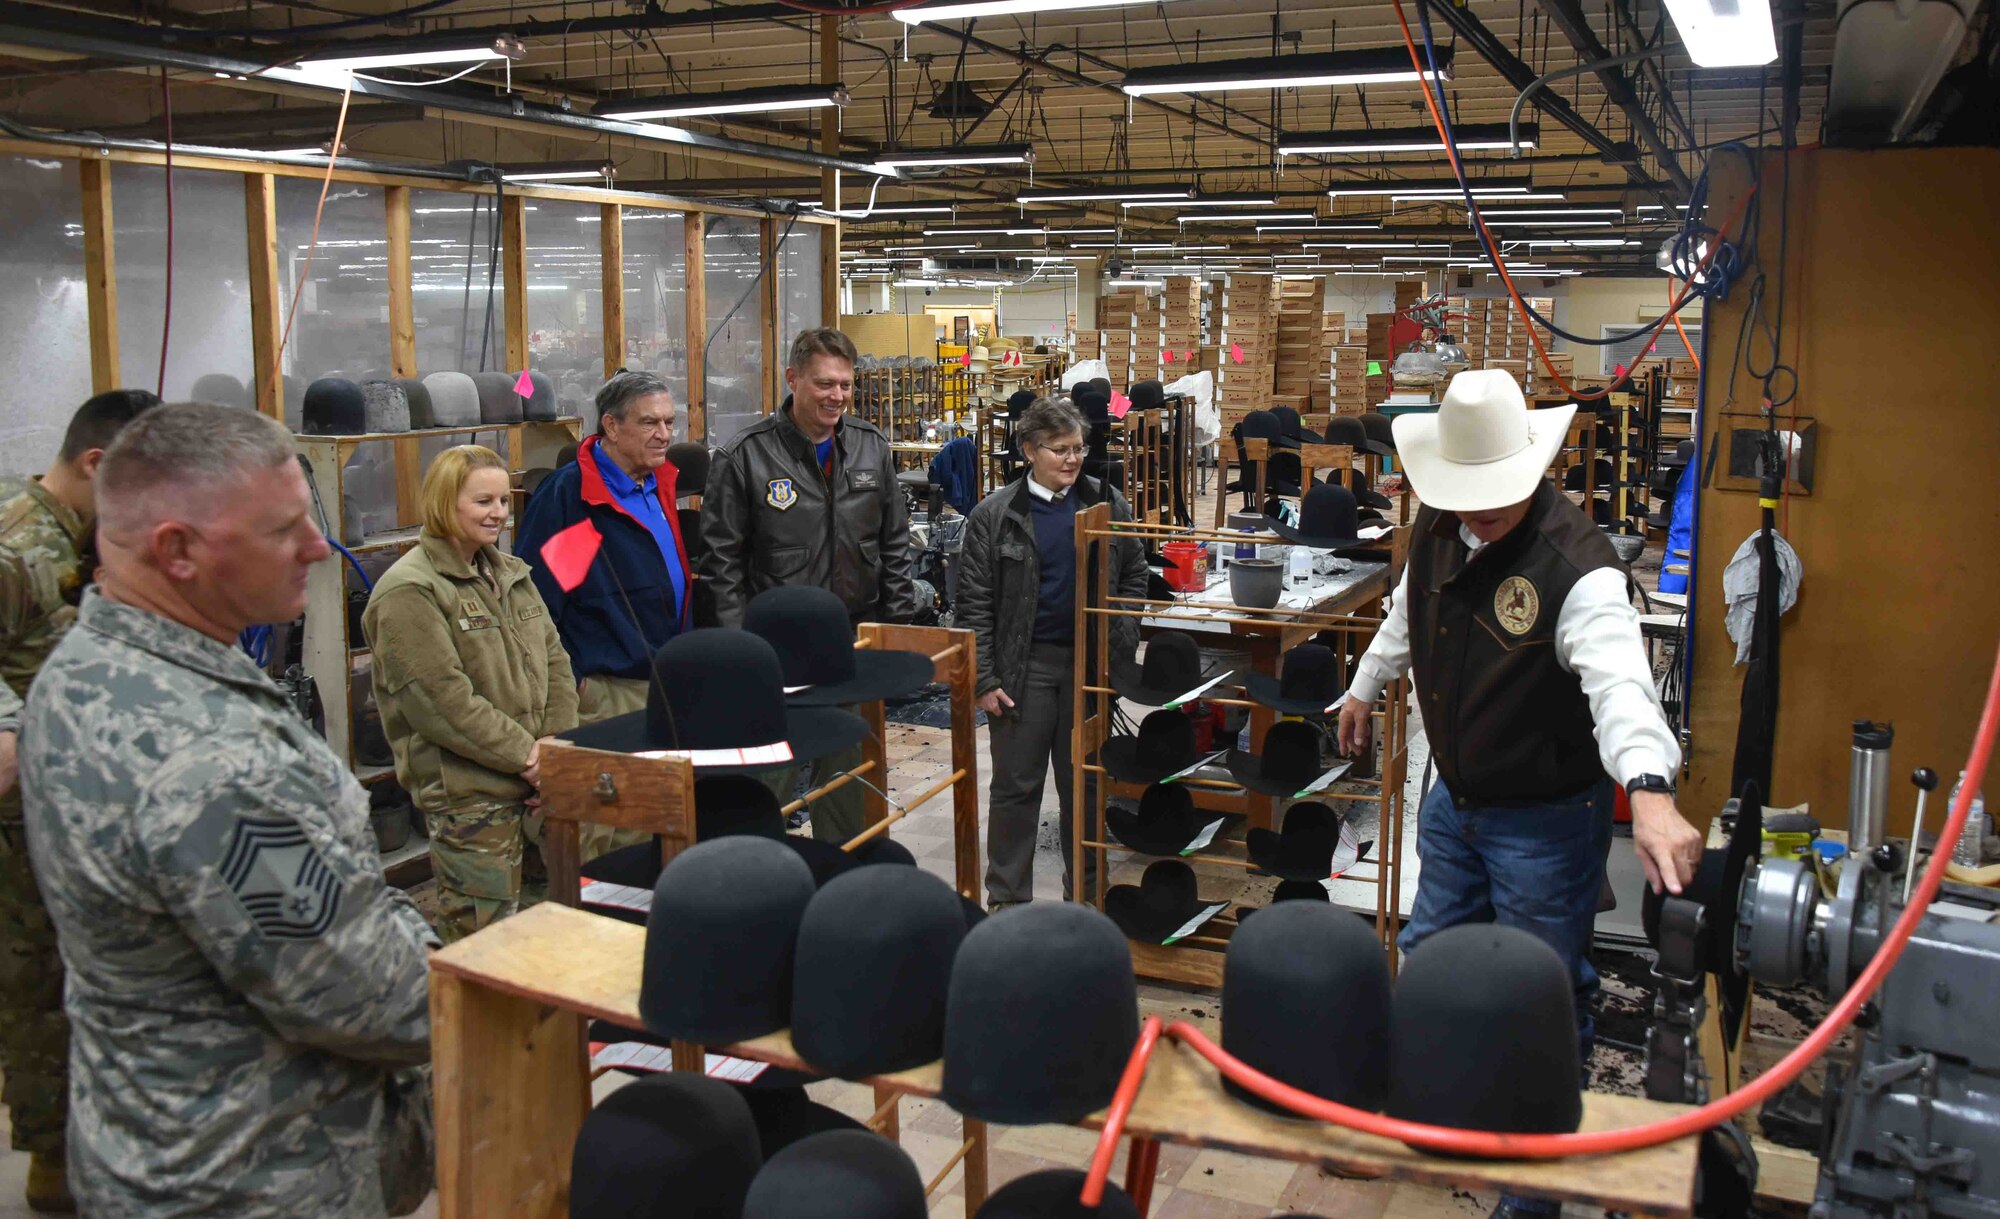 301st Fighter Wing Aircraft Maintenance Squadron Honorary Commander Mr. Keith Mundee (right), who is also the president of American Hat Co., leads several members of the wing's leadership on a factory tour of American Hat Company in Bowie, Texas on November 15, 2019. The 301st Fighter Wing Honorary Commanders Program has invited civic leaders to many behind-the-scenes military tours but this was the first time we were hosted by one of our honorary commanders. (U.S. Air Force photo by Mr. Jeremy Roman)